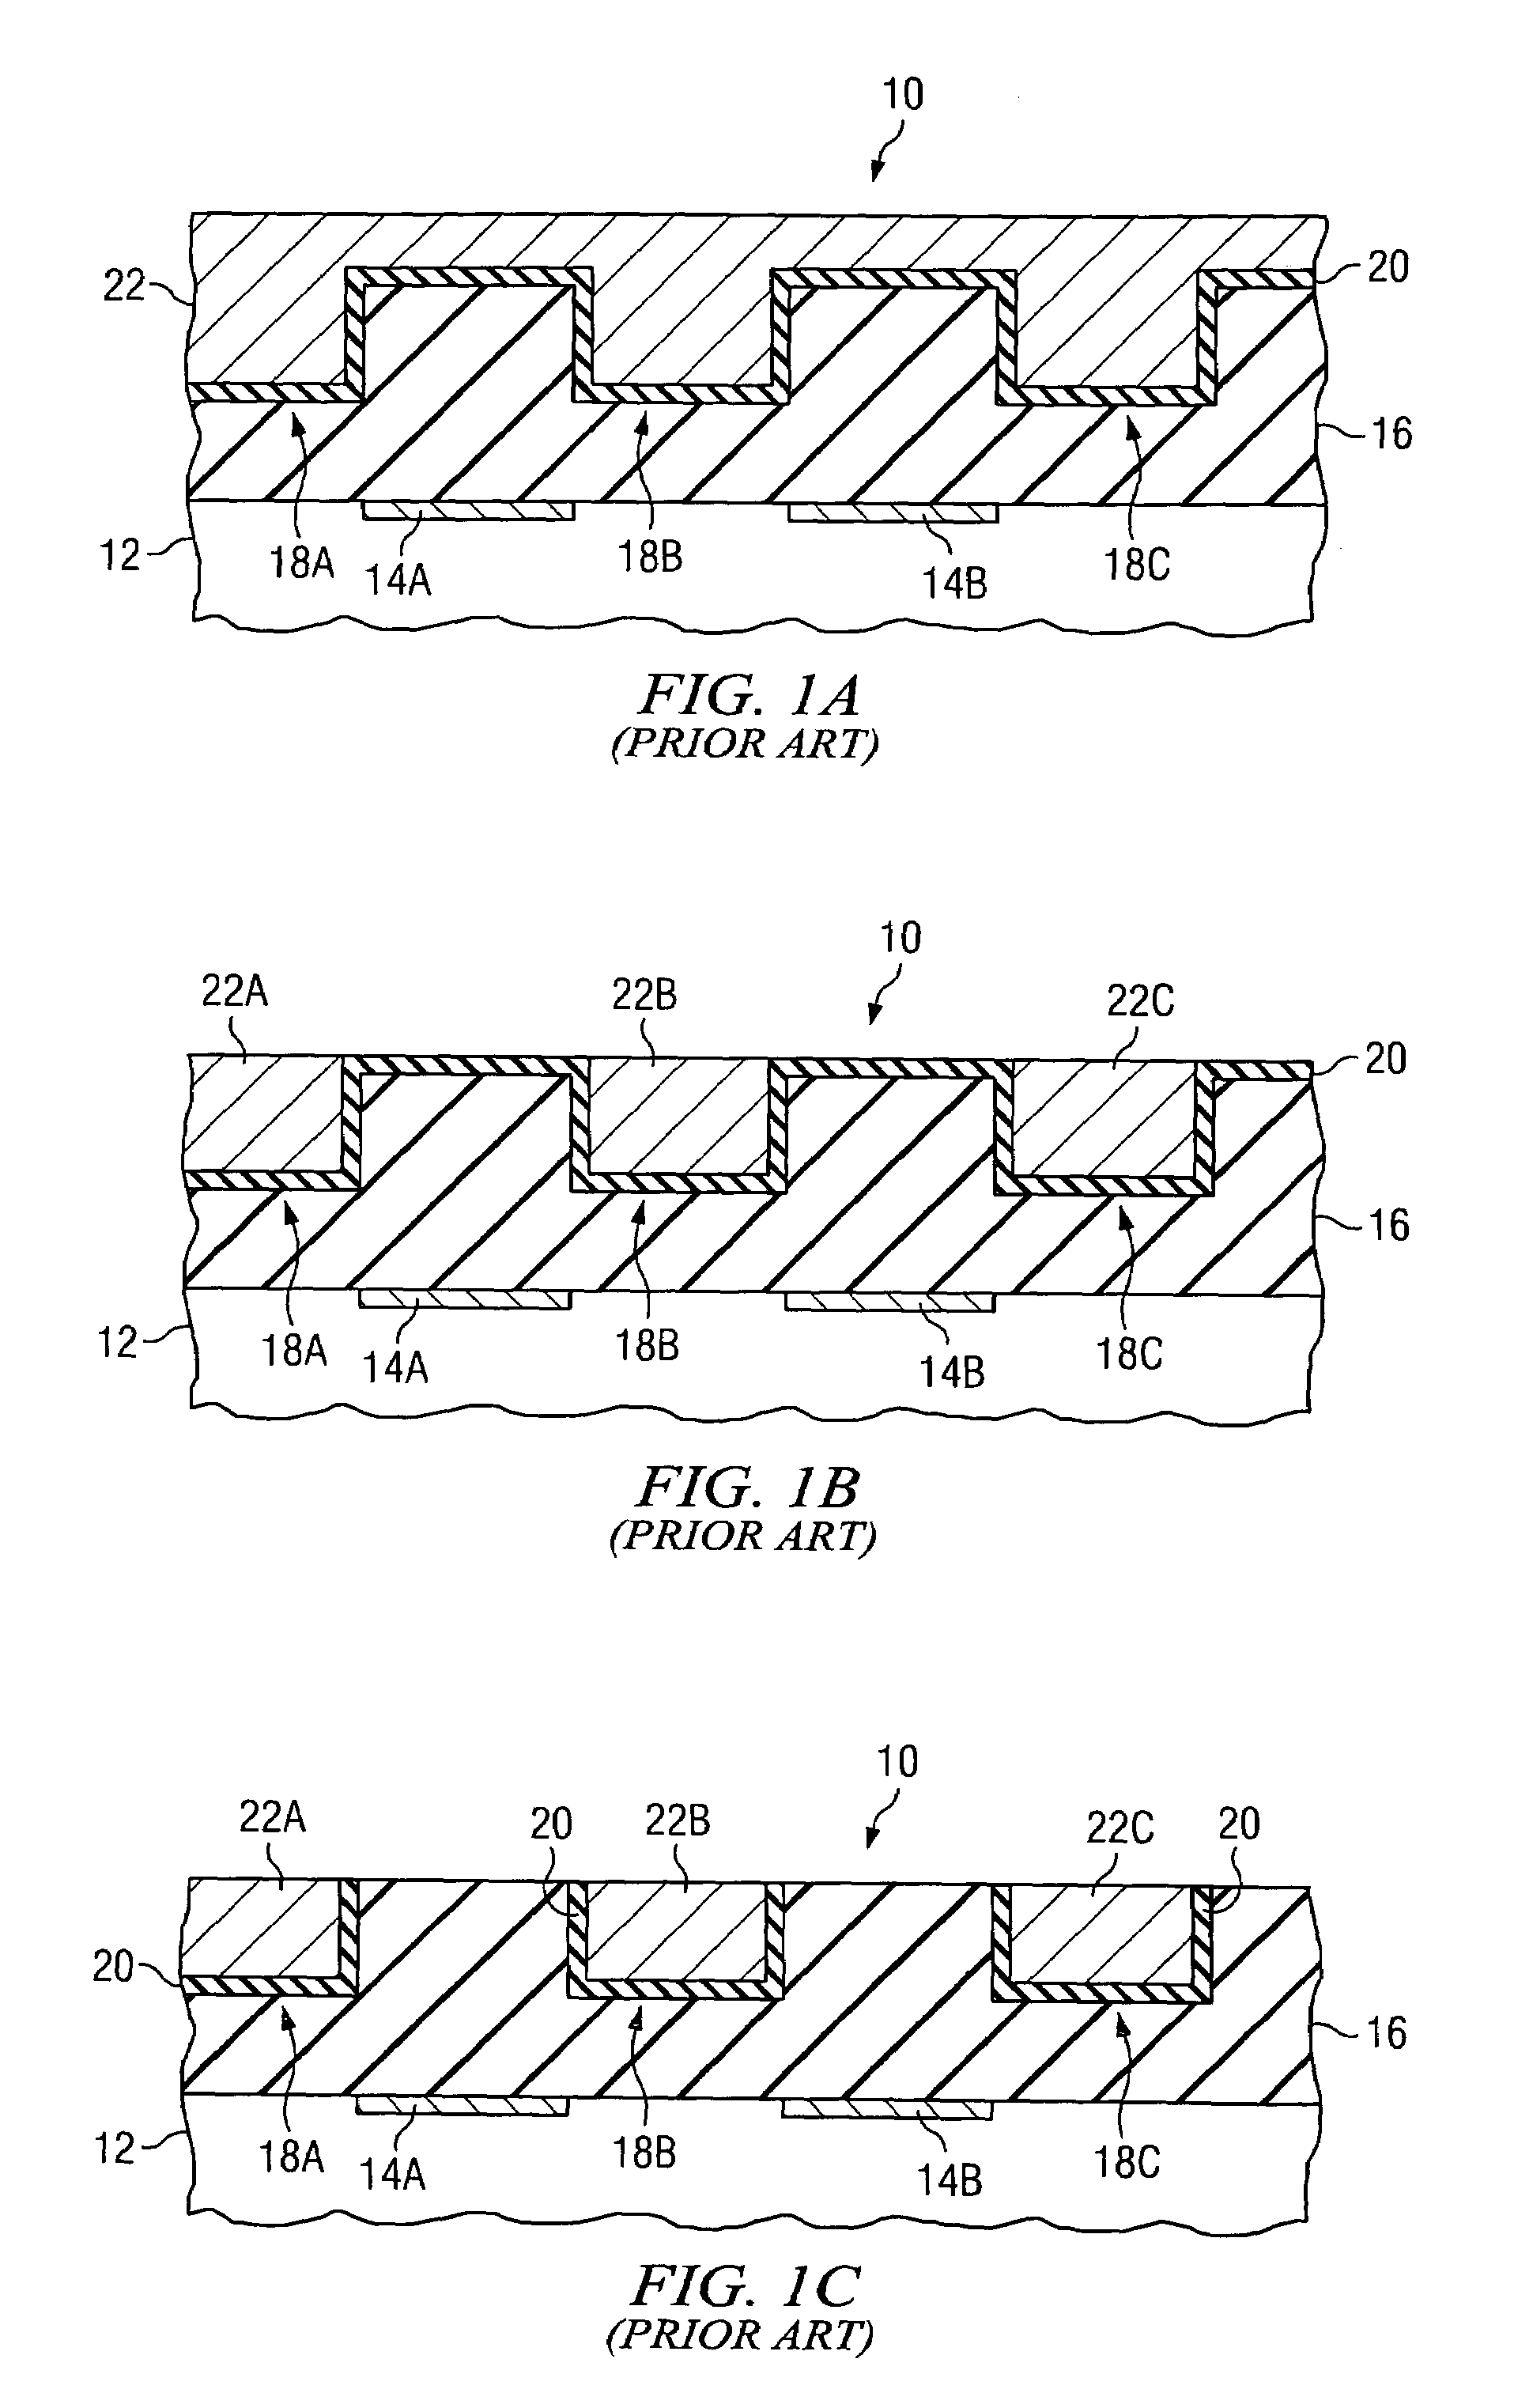 Self-aligned mask to reduce cell layout area